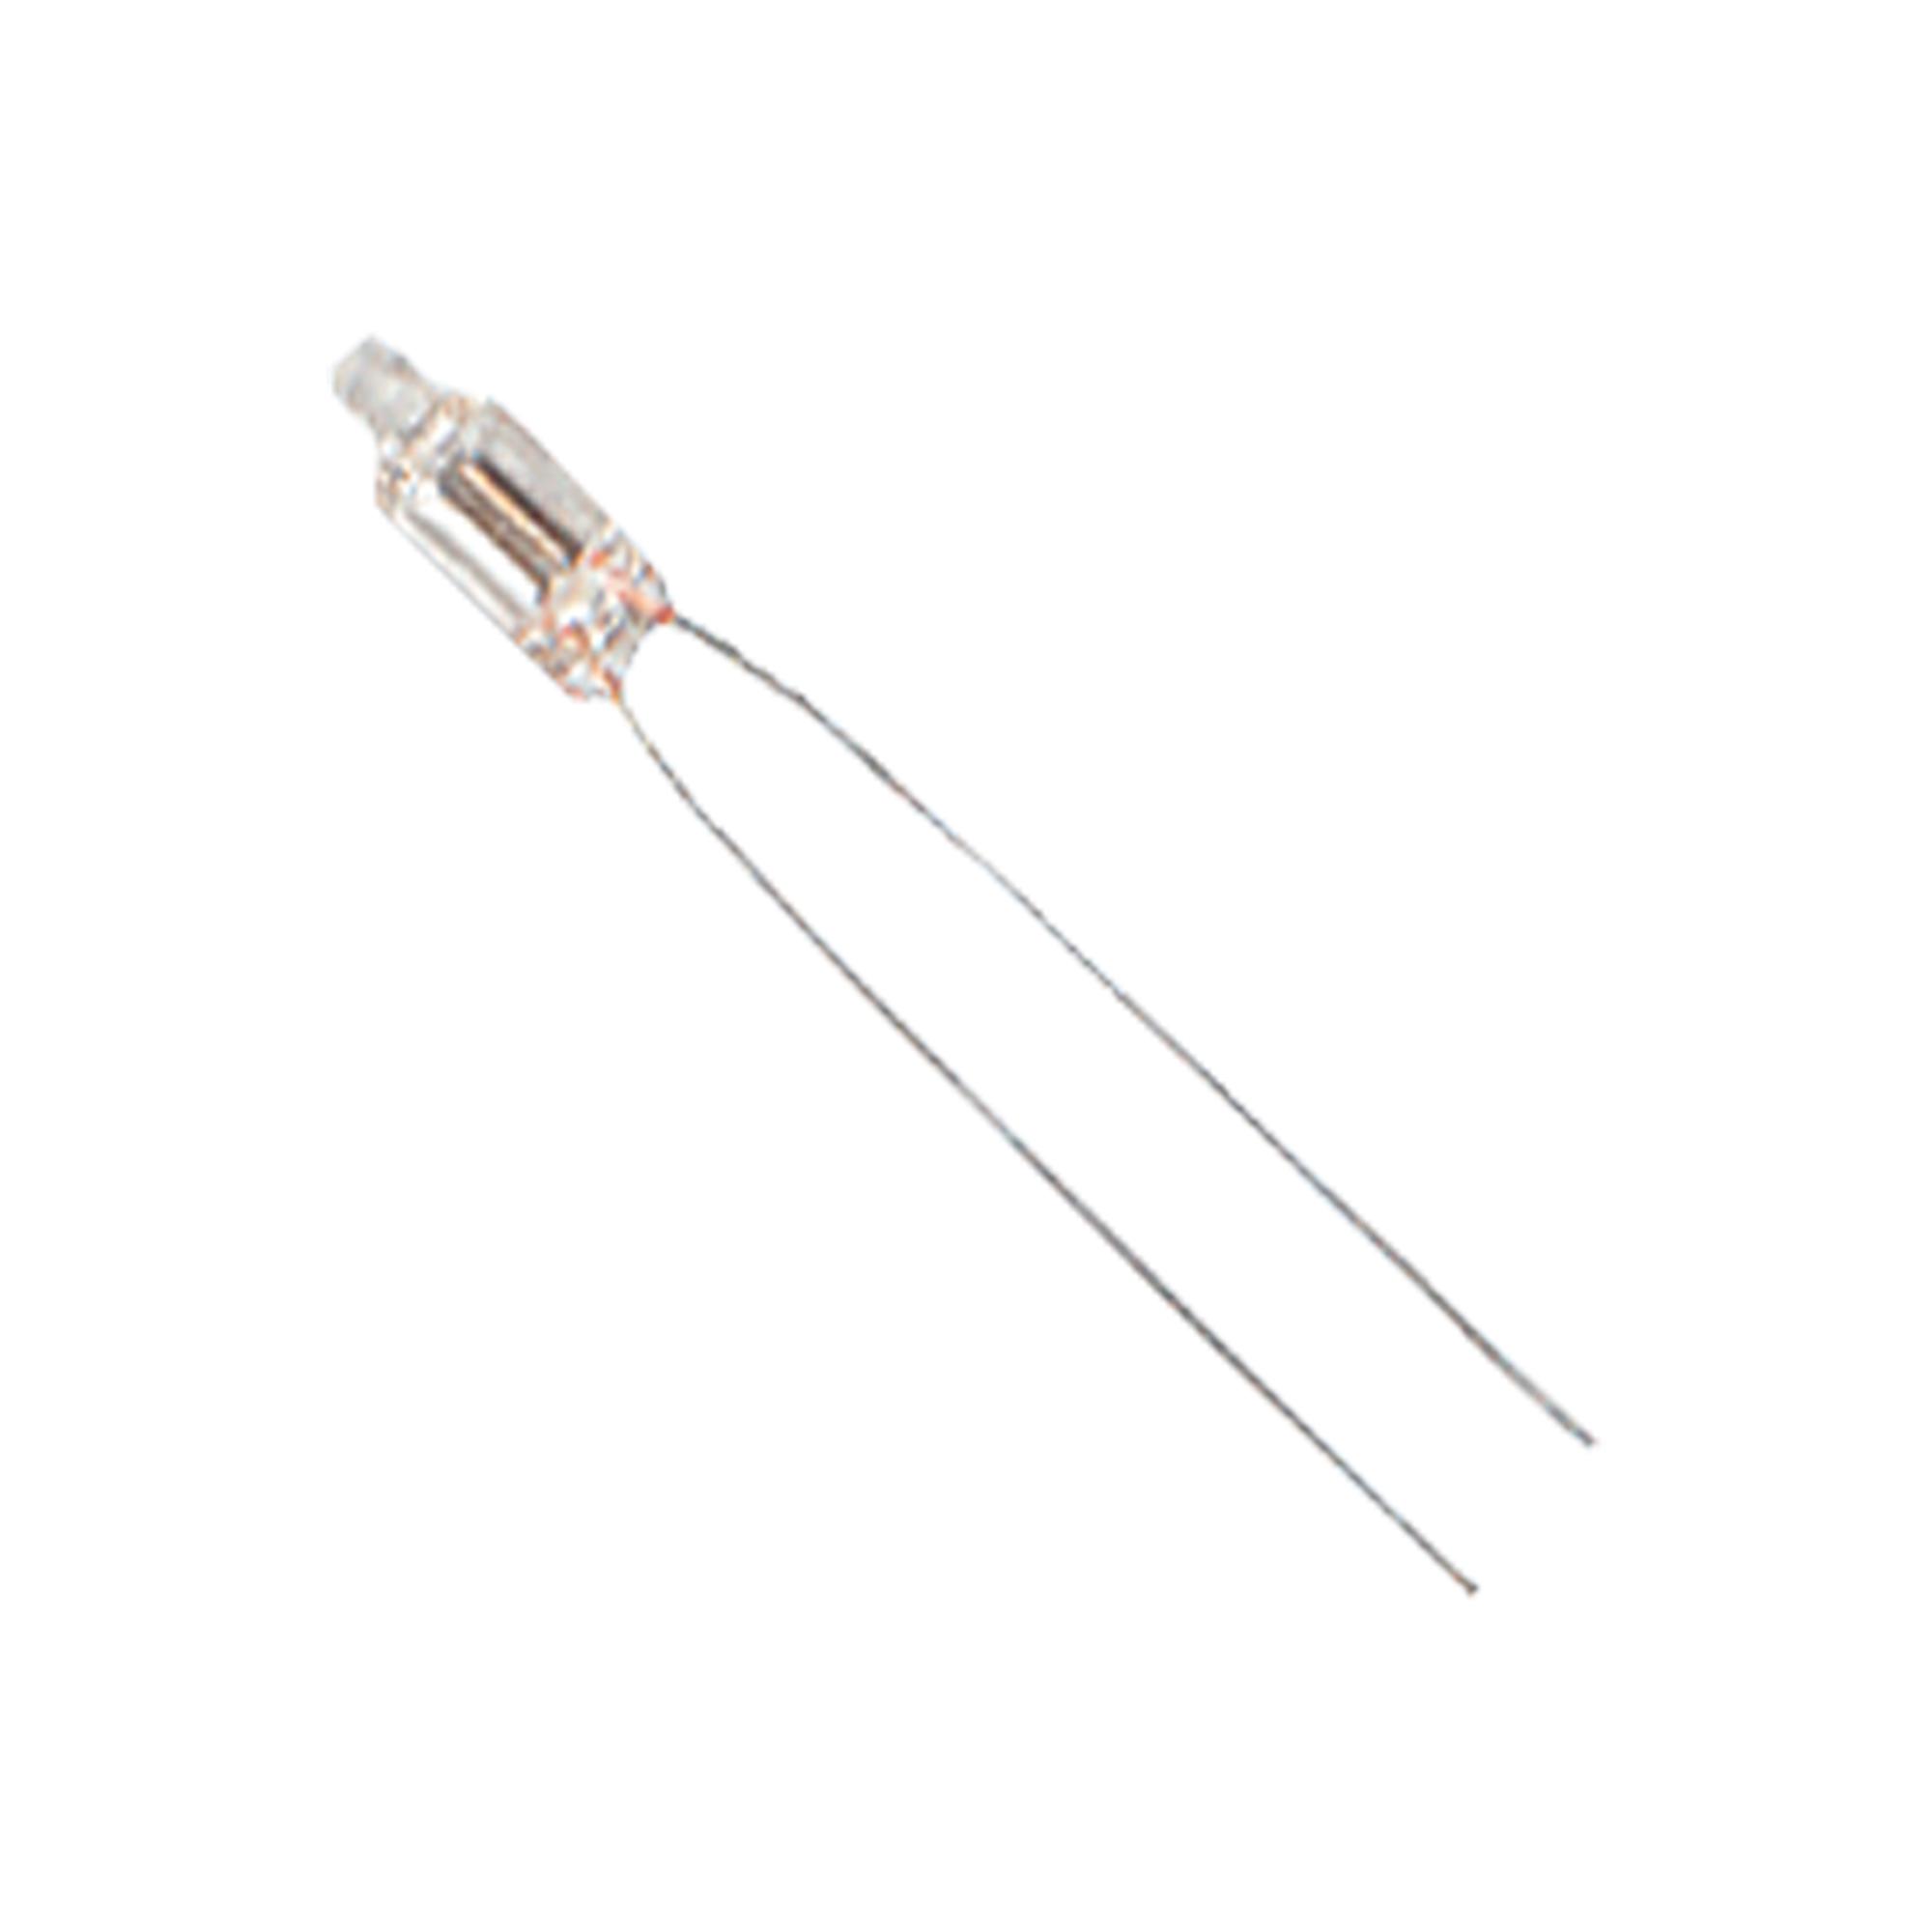 Cml Innovative Technologies 2Ml Neon Lamp, Wire Ended, T1.1/4